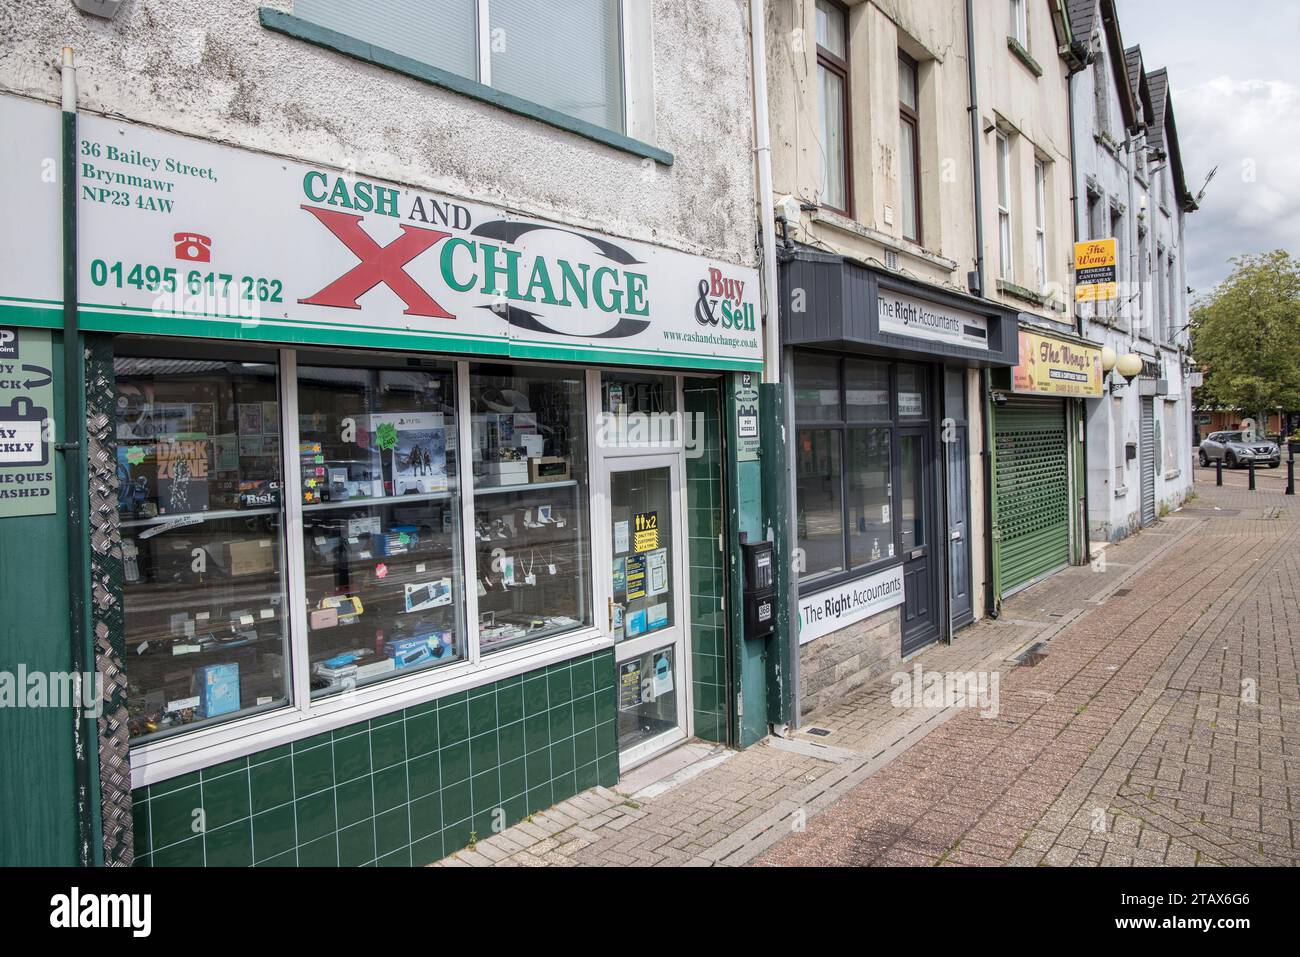 Closed shops and buy and sell shop, Brynmawr, Wales, UK Stock Photo